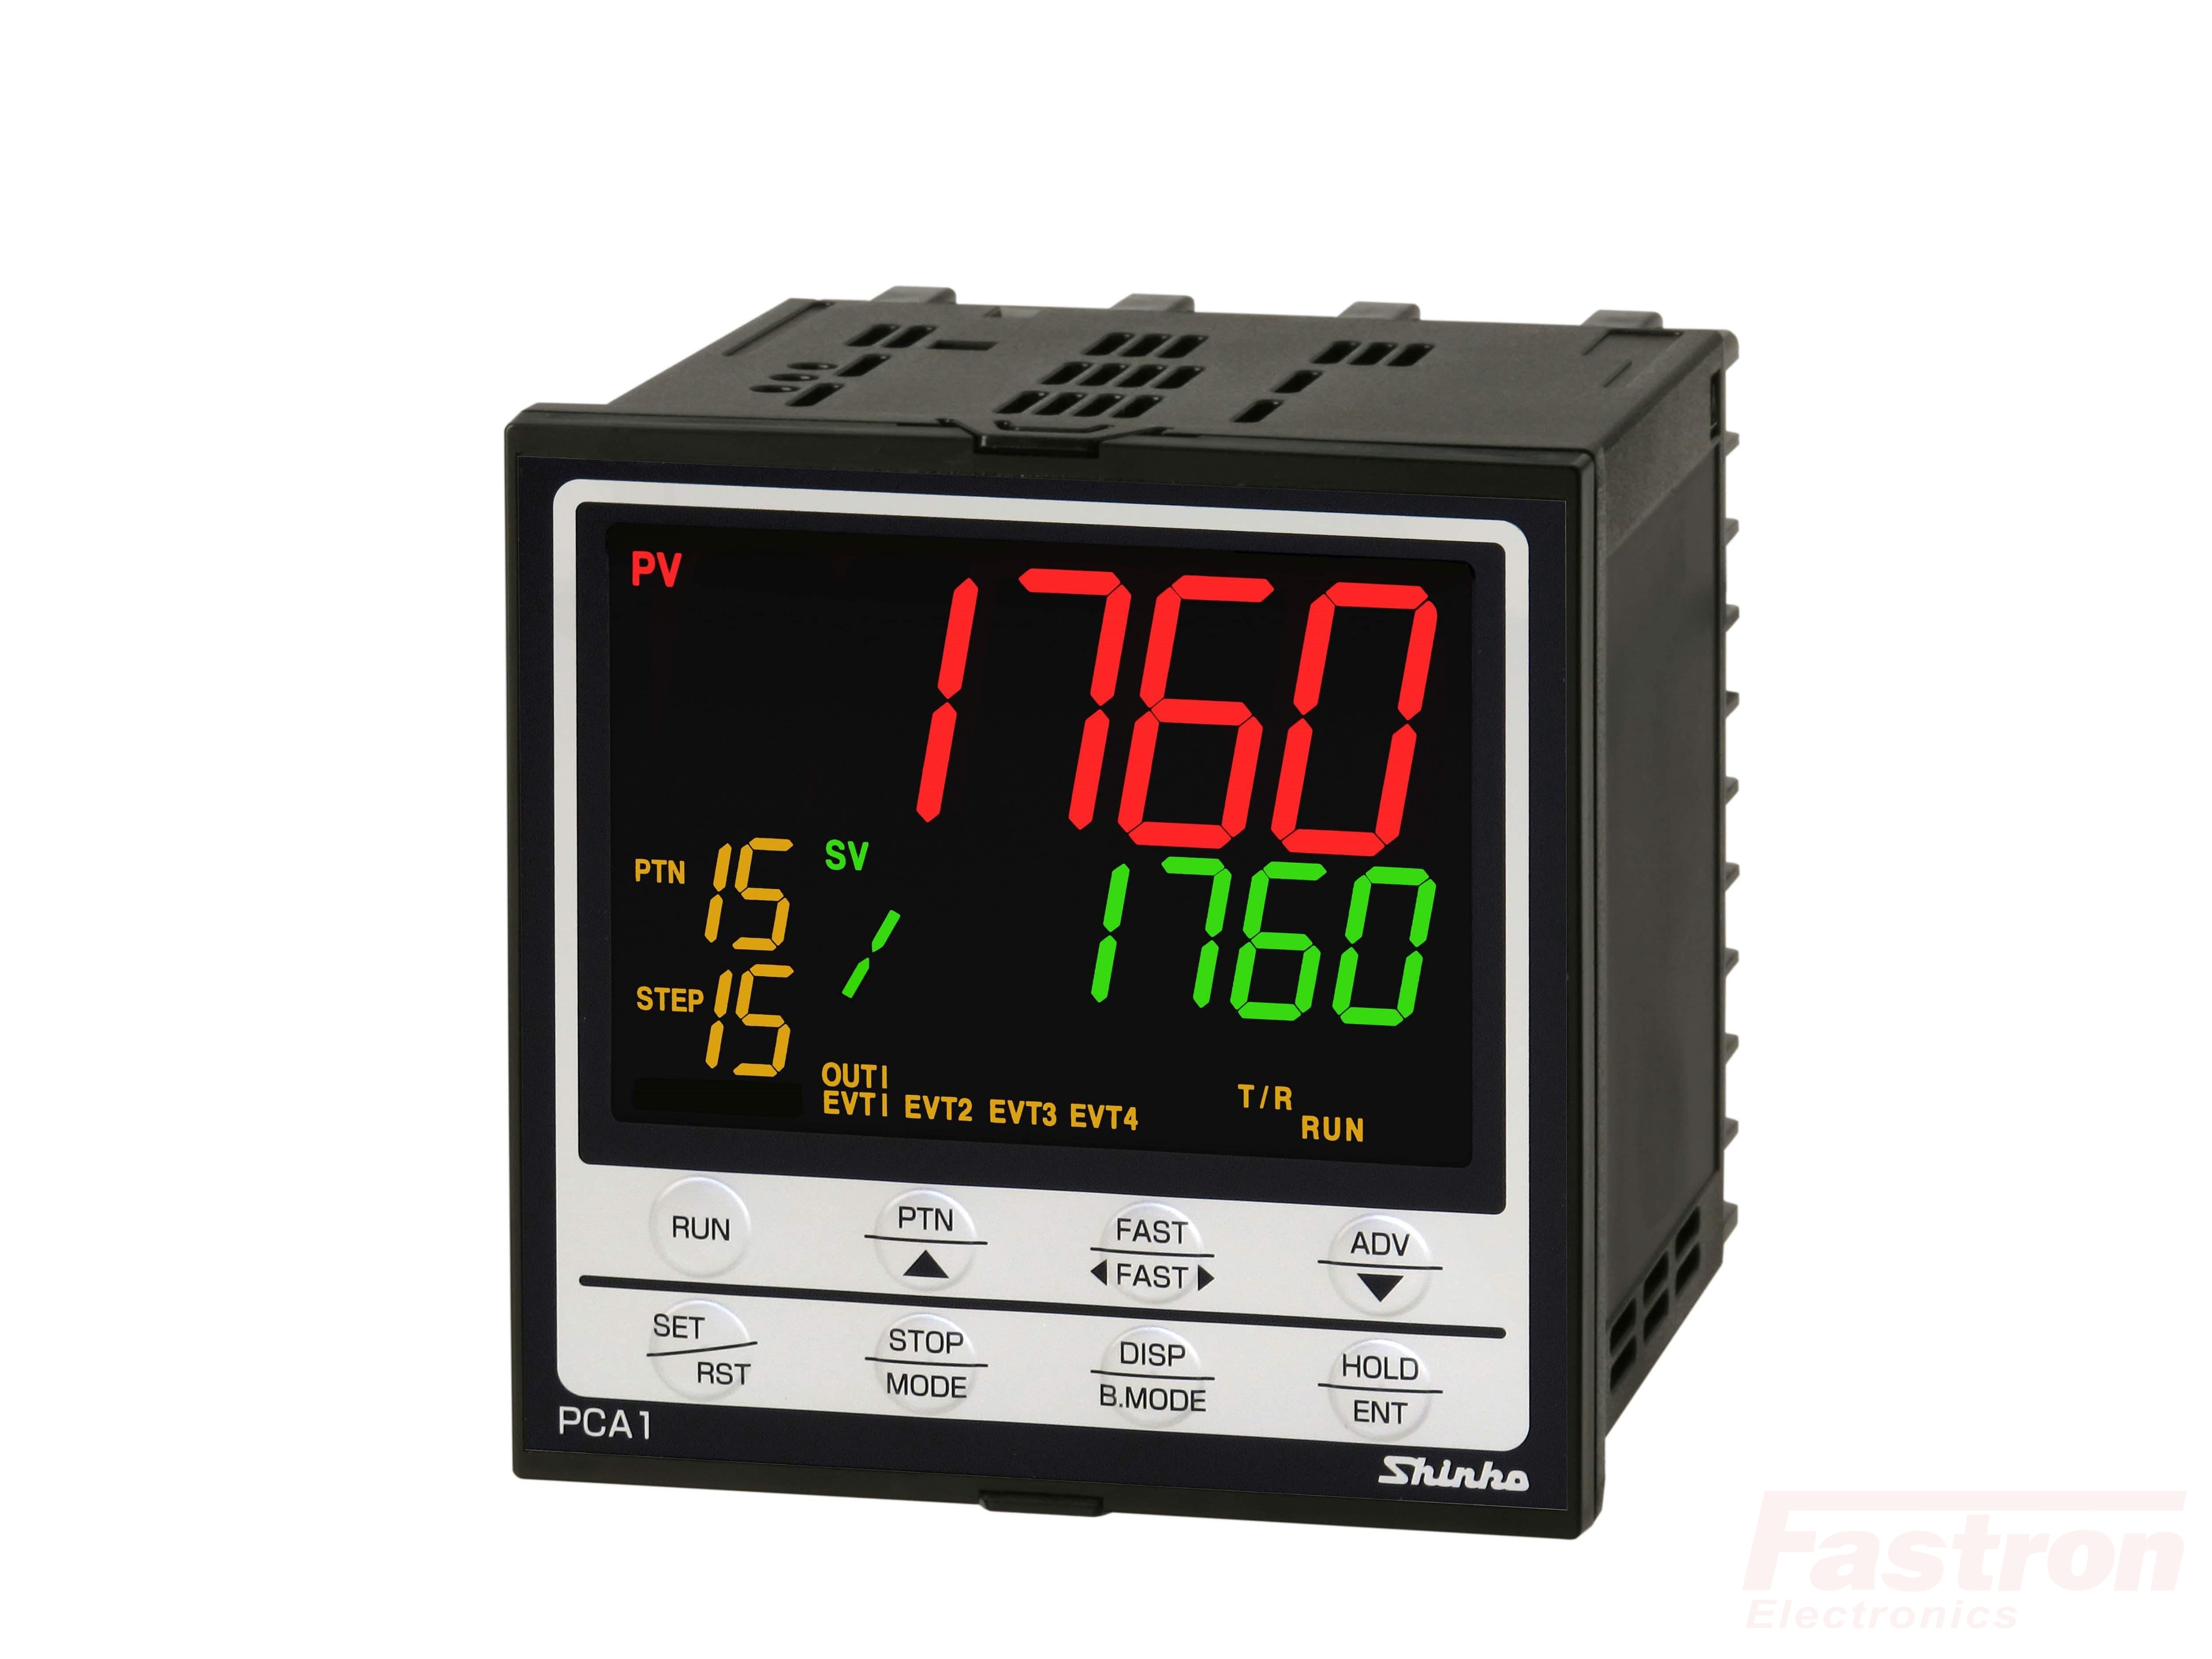 PCA1R10010 Temperature Pattern Controller, 96x96mm, 24VAC/DC, Relay output, Retransmission, 16 steps, 16 patterns